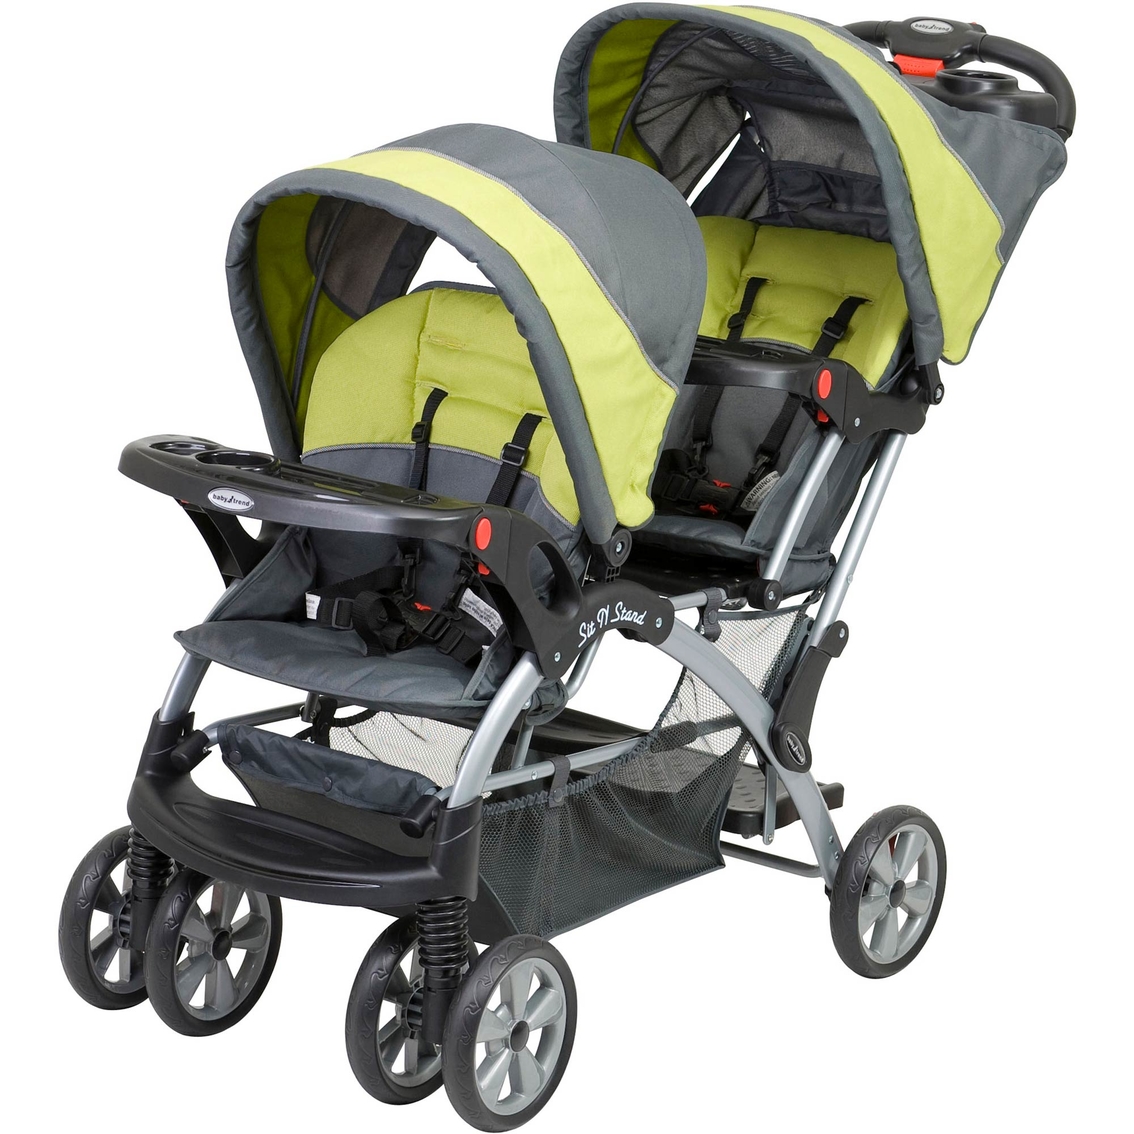 baby trend stroller with speakers